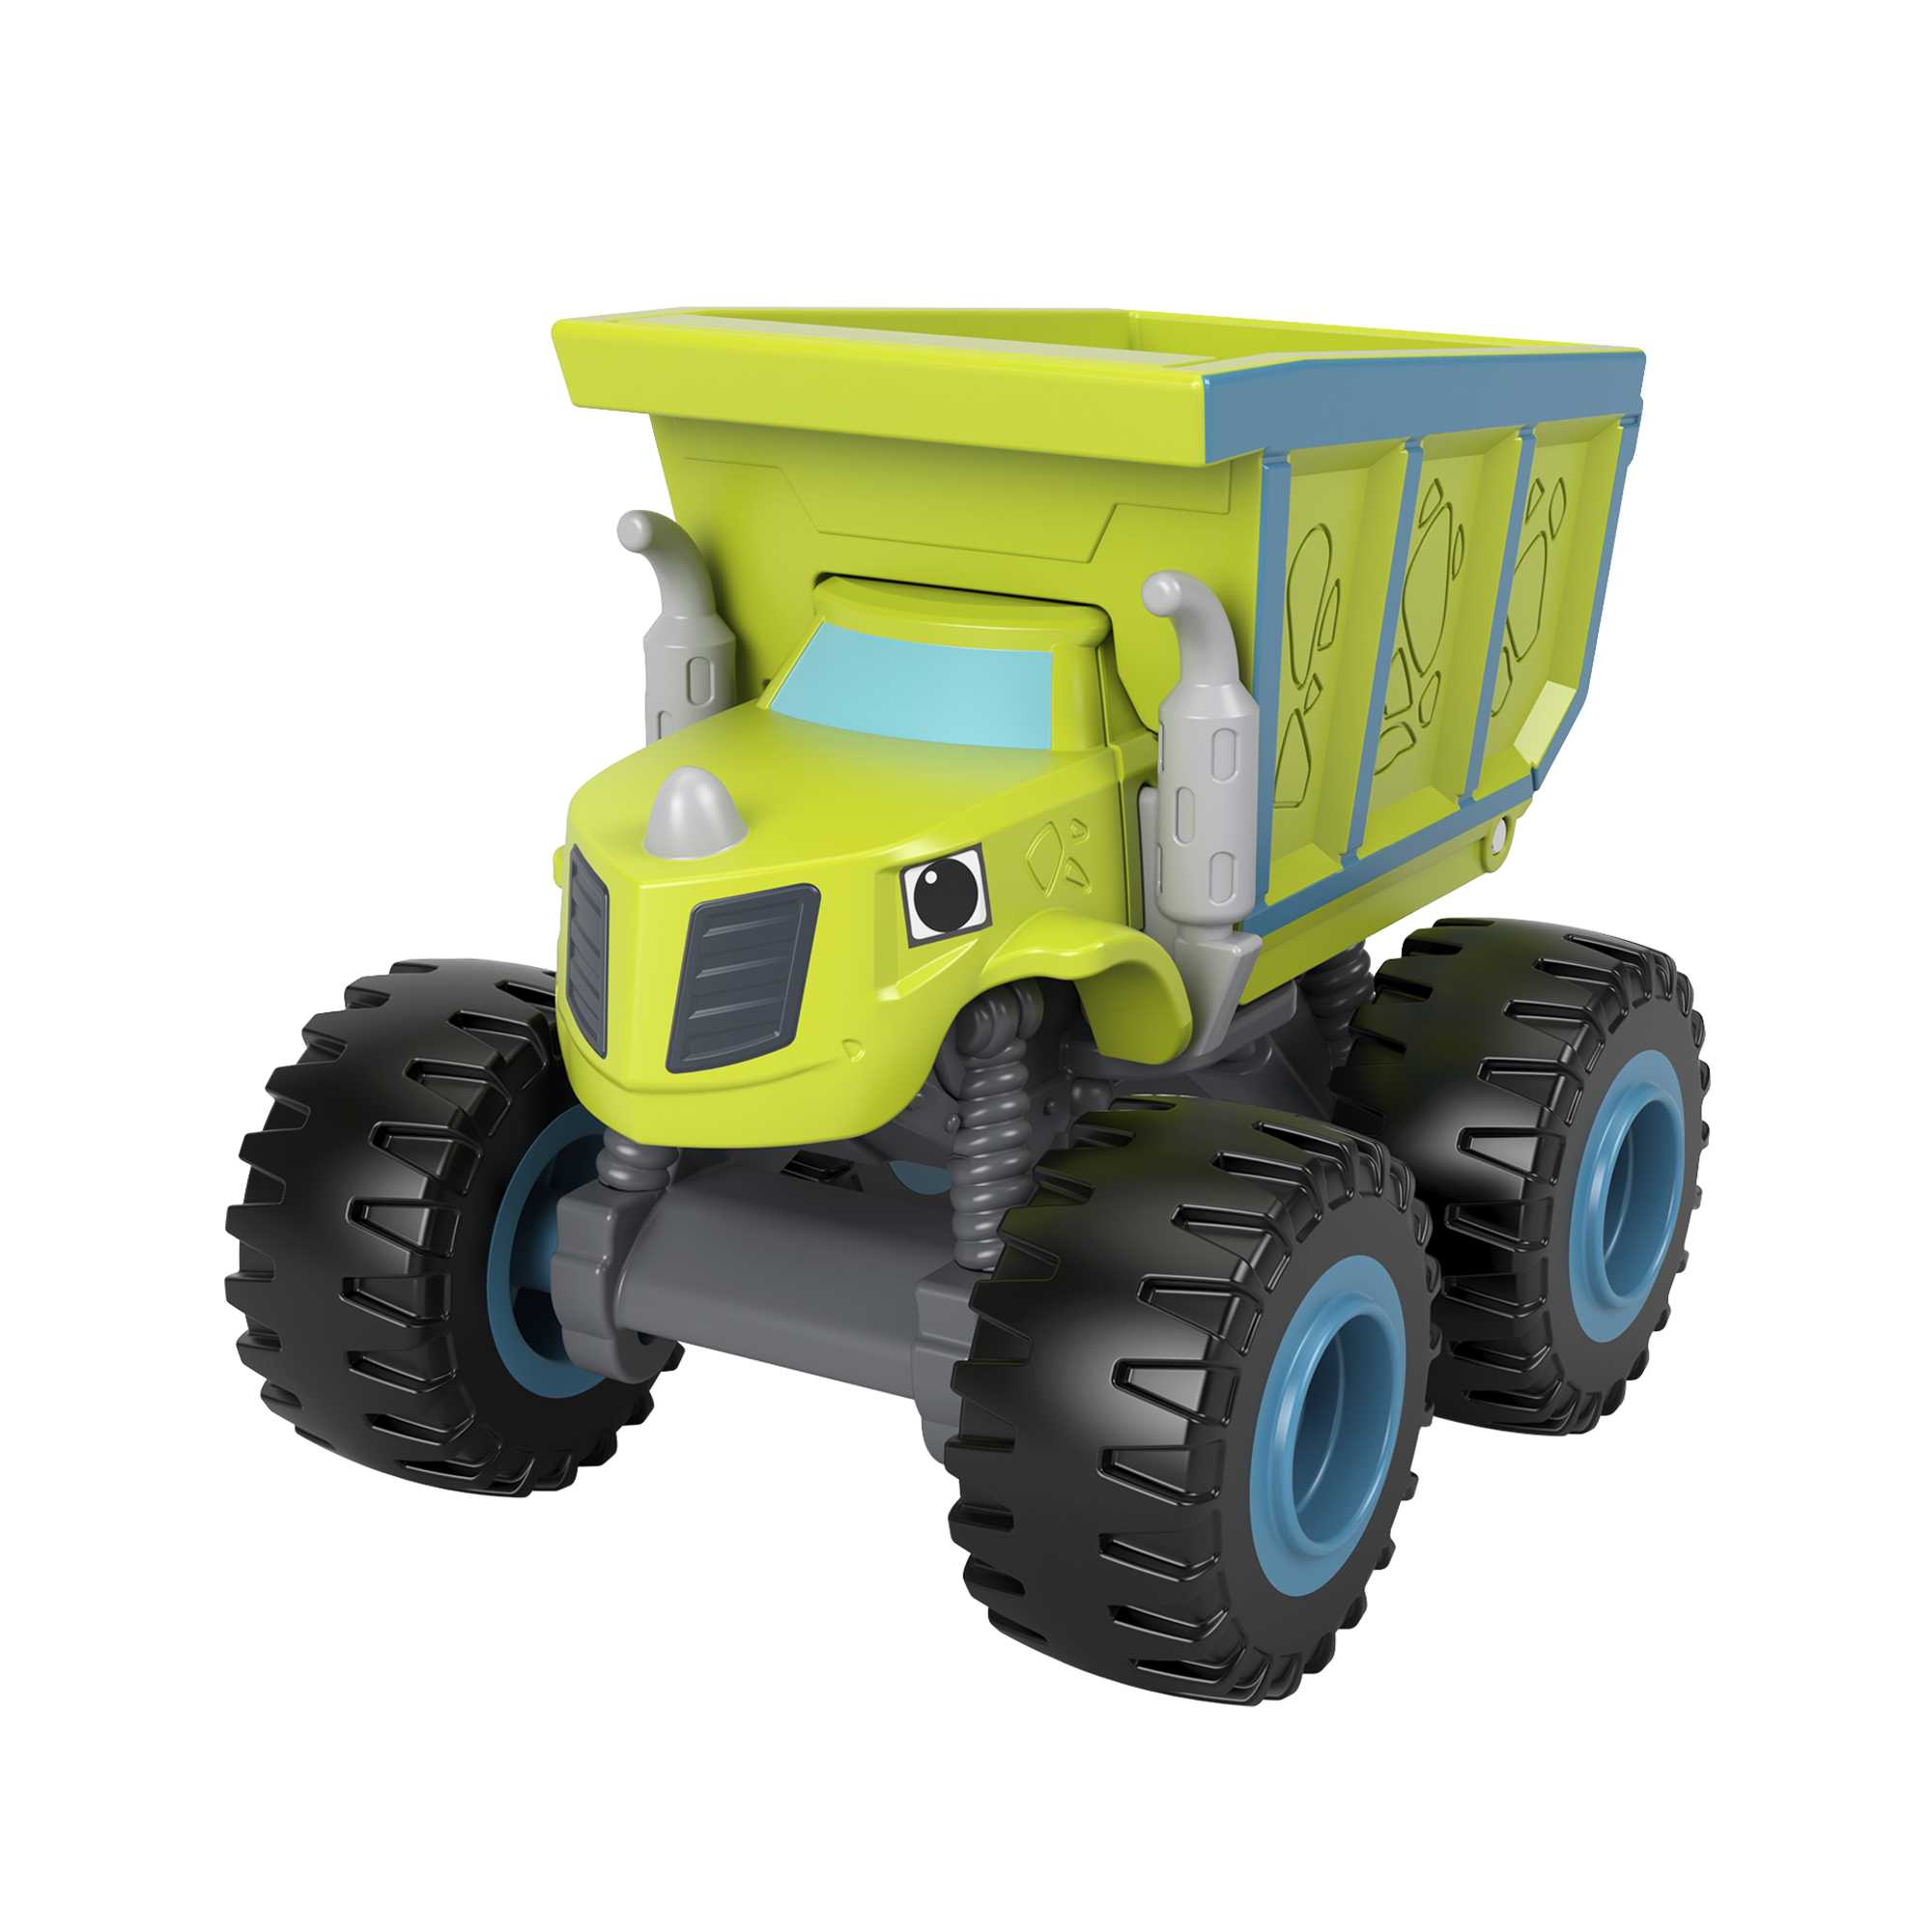 Fisher-Price Blaze & the Monster Machines, Blaze & AJ, large push-along  monster truck with poseable figure for preschool kids ages 3 and up